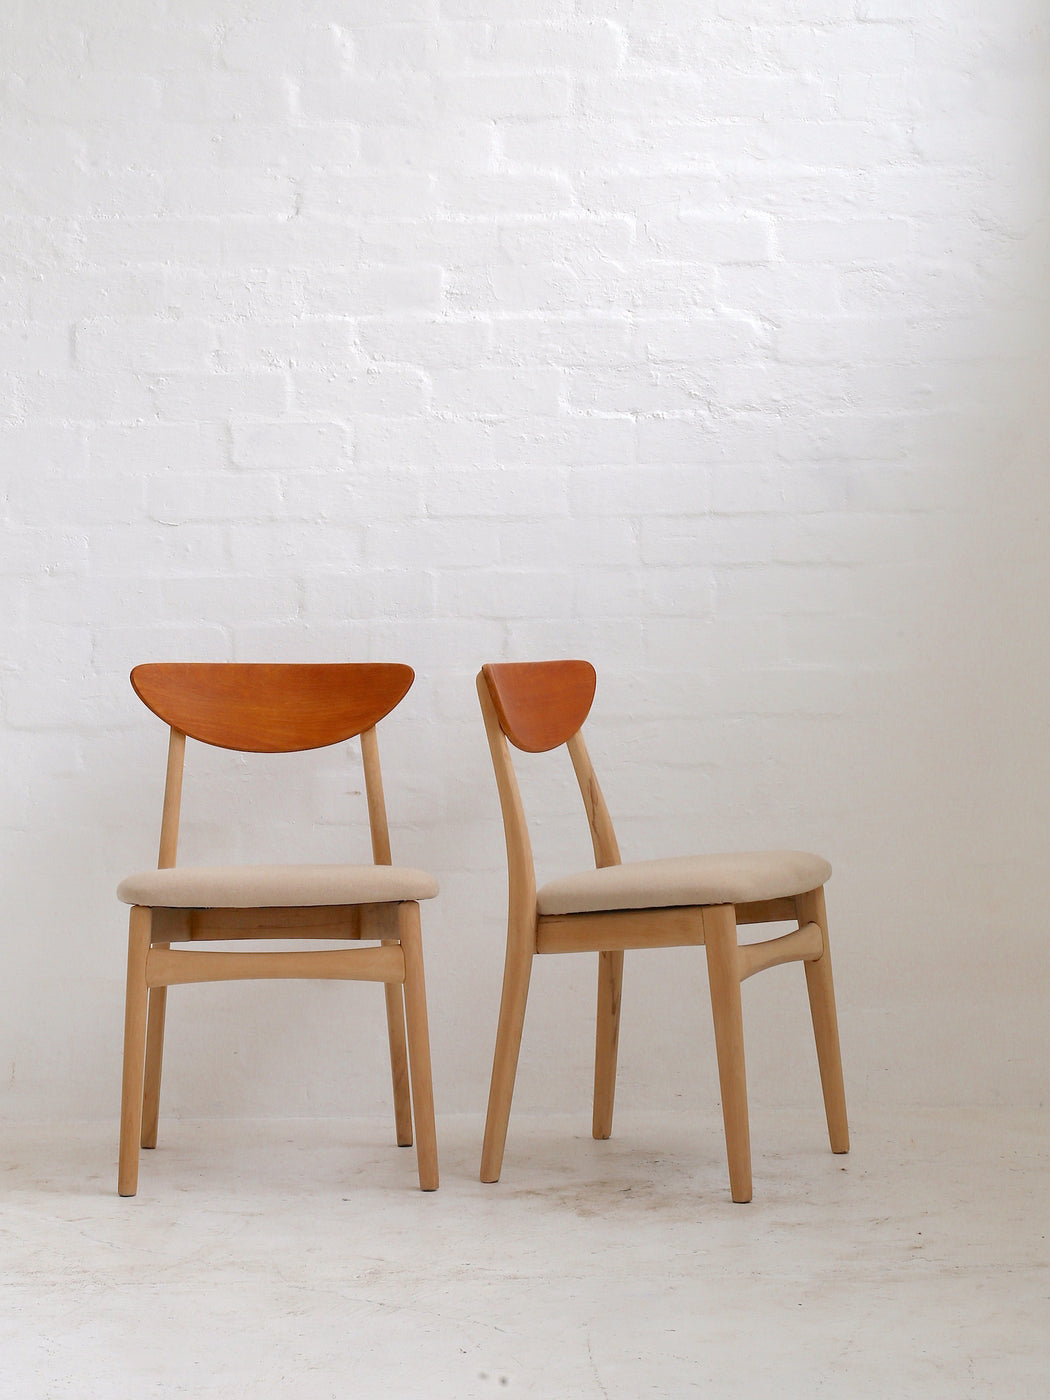 Japanese Dining Chairs